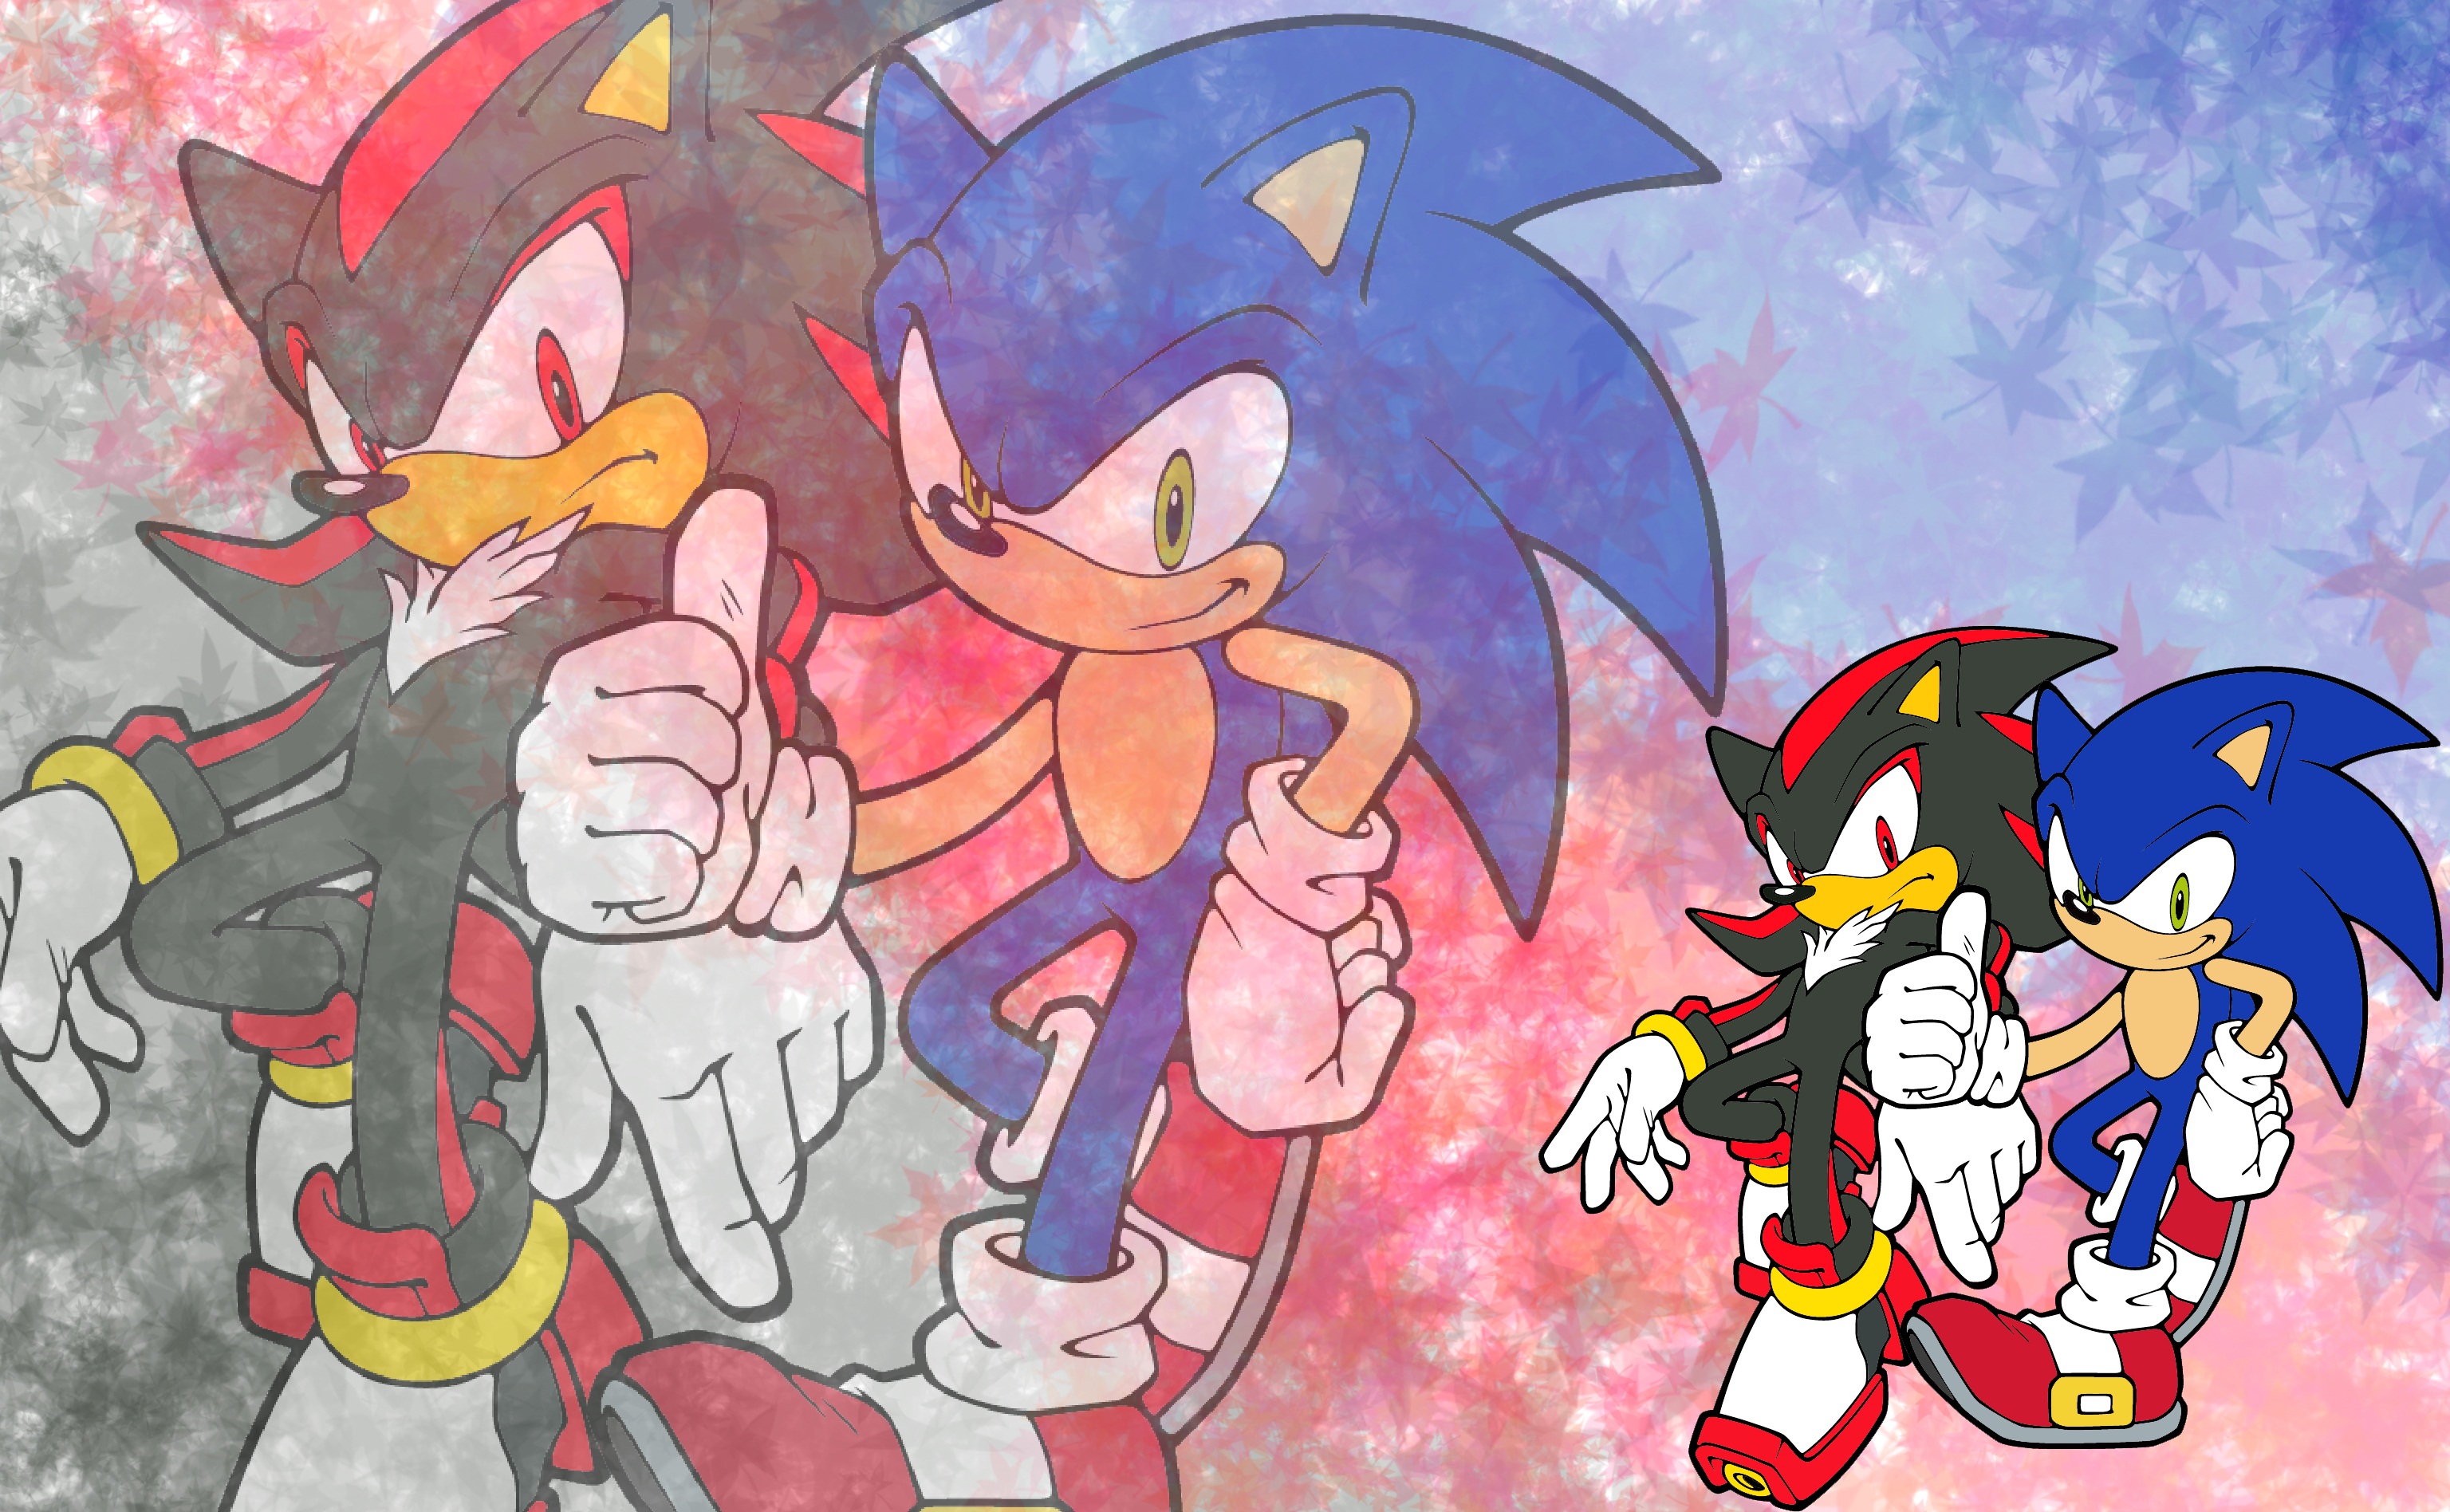 4 Sonic Adventure 2 HD Wallpapers Backgrounds - Wallpaper Abyss